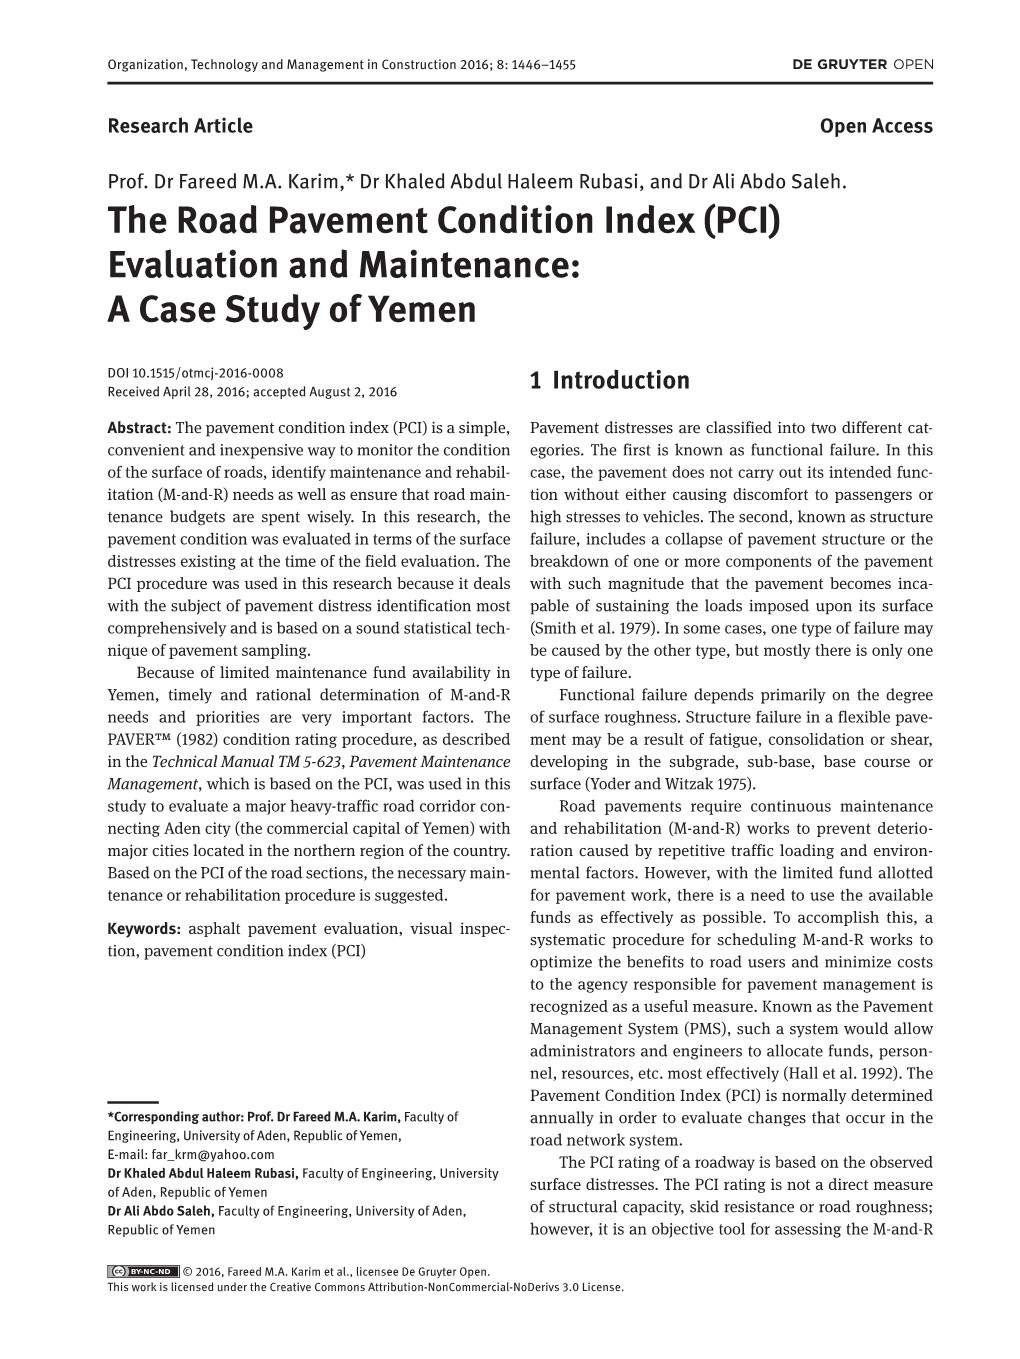 The Road Pavement Condition Index (PCI) Evaluation and Maintenance: a Case Study of Yemen